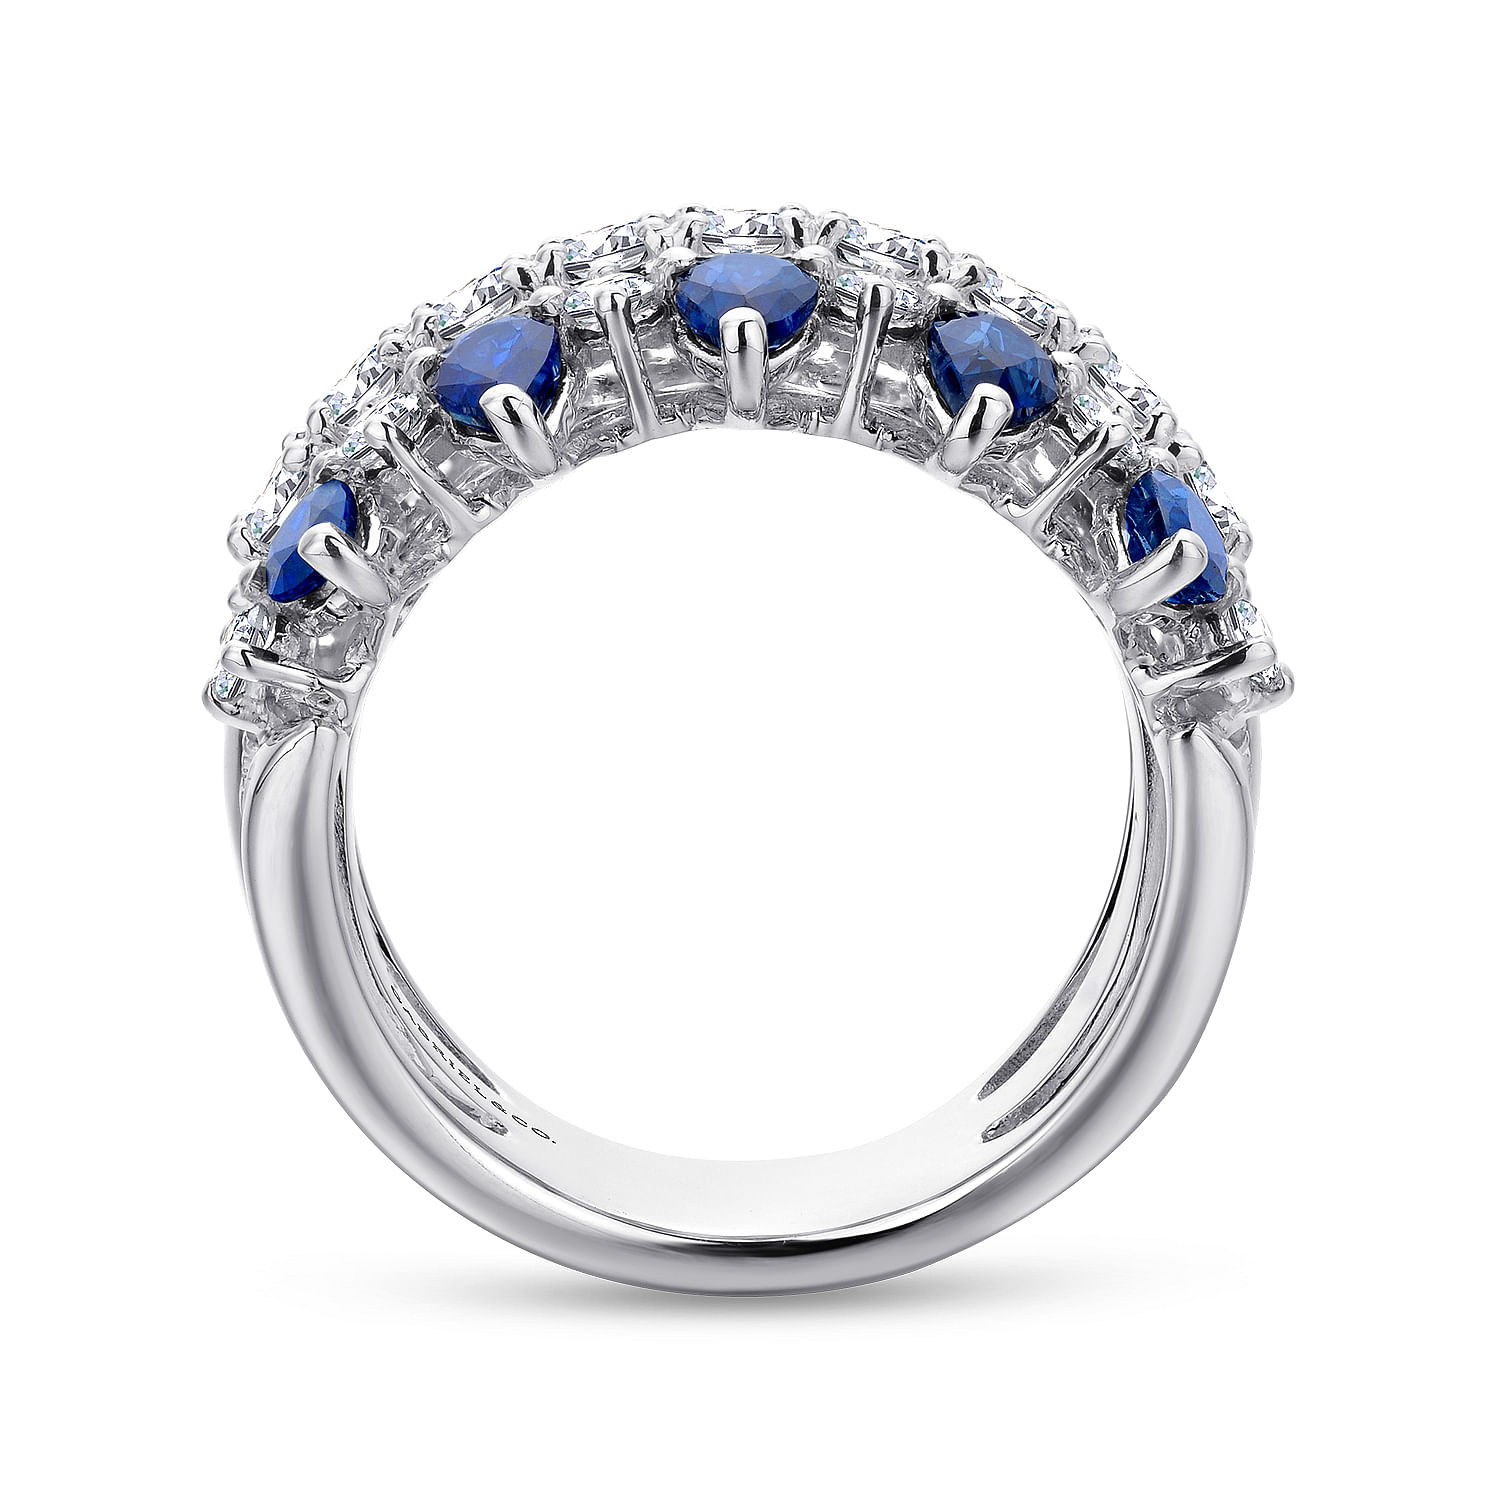 Wide 14K White Gold Round and Pear Shaped Diamond and Sapphire ...